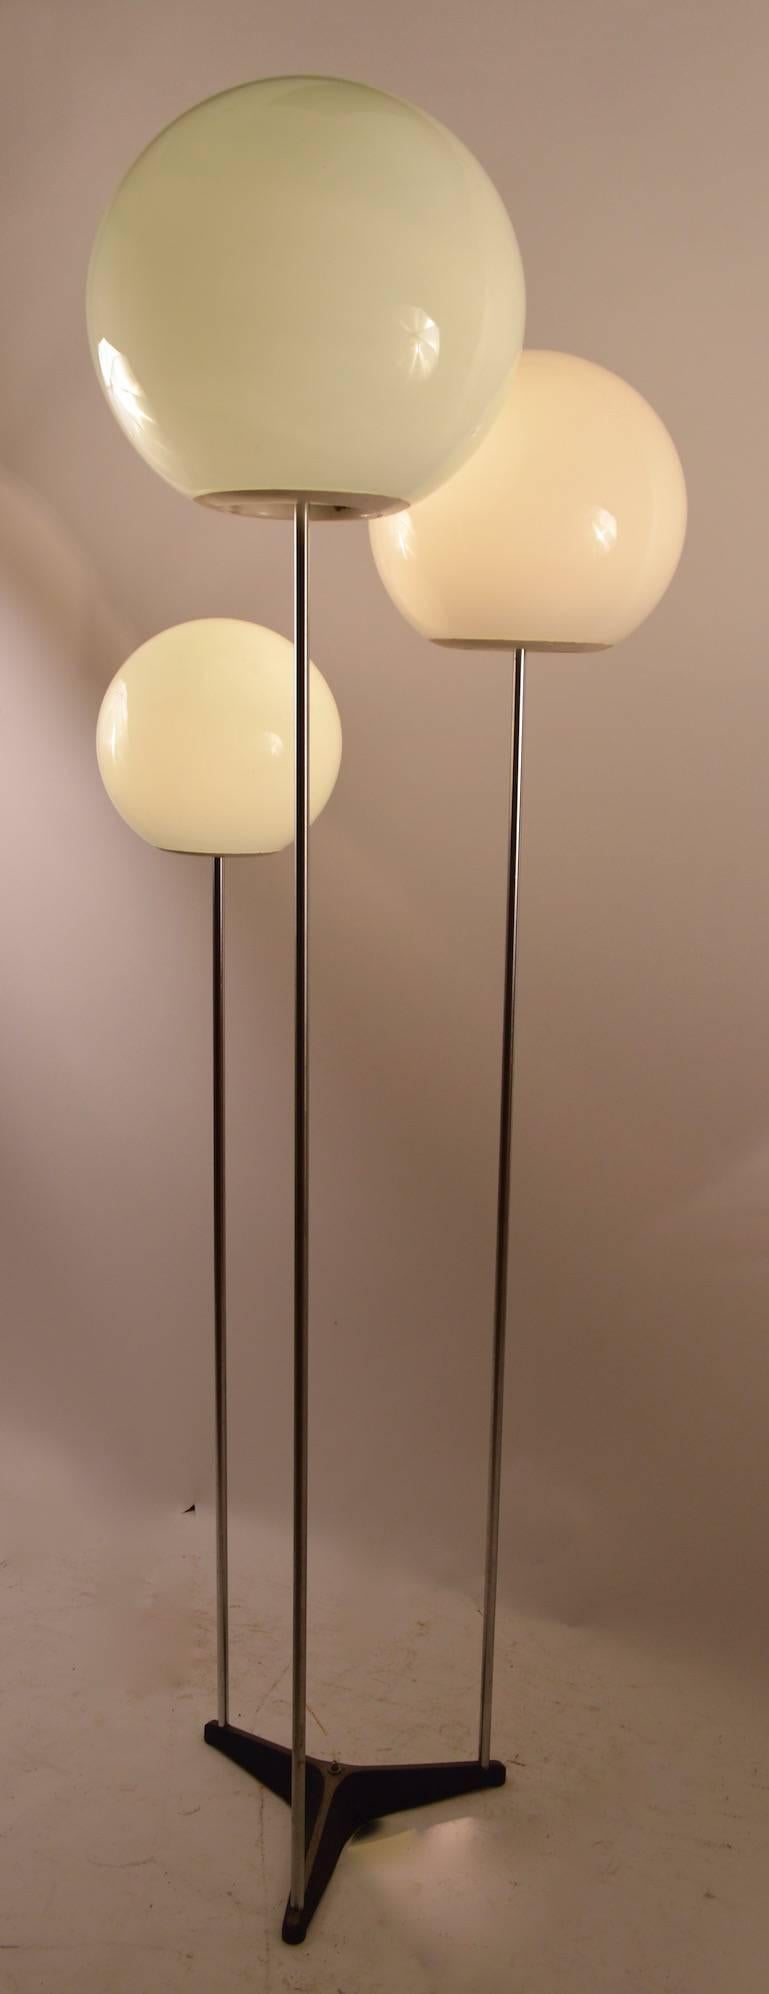 Three light ball top floor lamp, each globe is descending in height and size (12